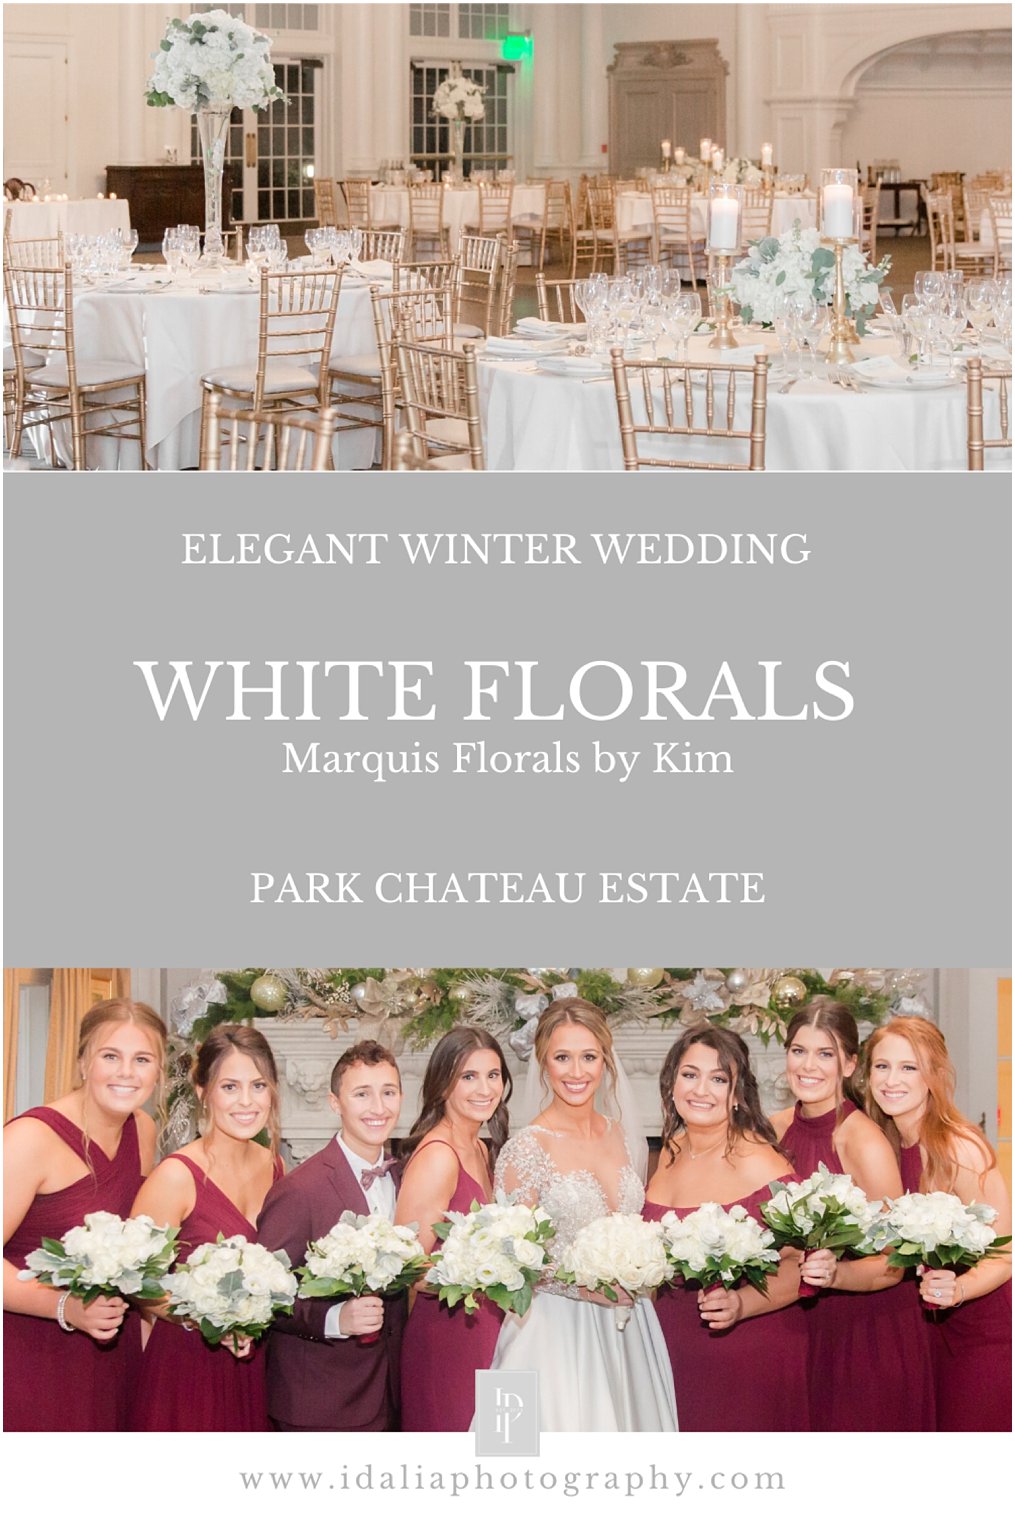 Check out these winter florals by Marquis Florals by Kim | A winter wedding at Park Chateau Estate and Gardens | Photos by Idalia Photography